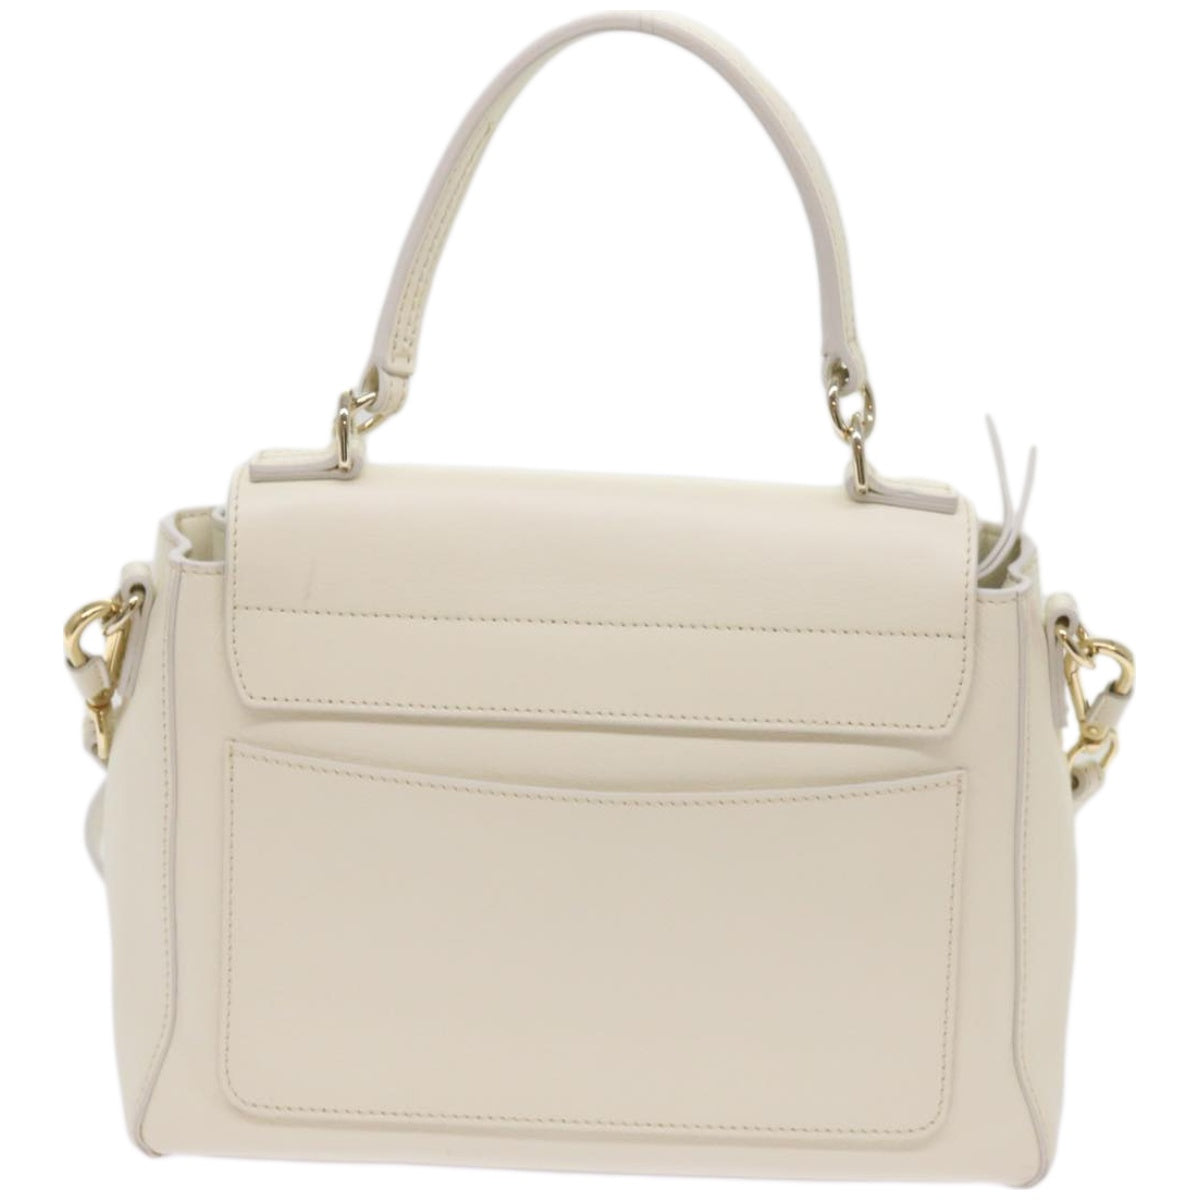 Chloe Faye day Hand Bag Leather White Auth 66645 - 0